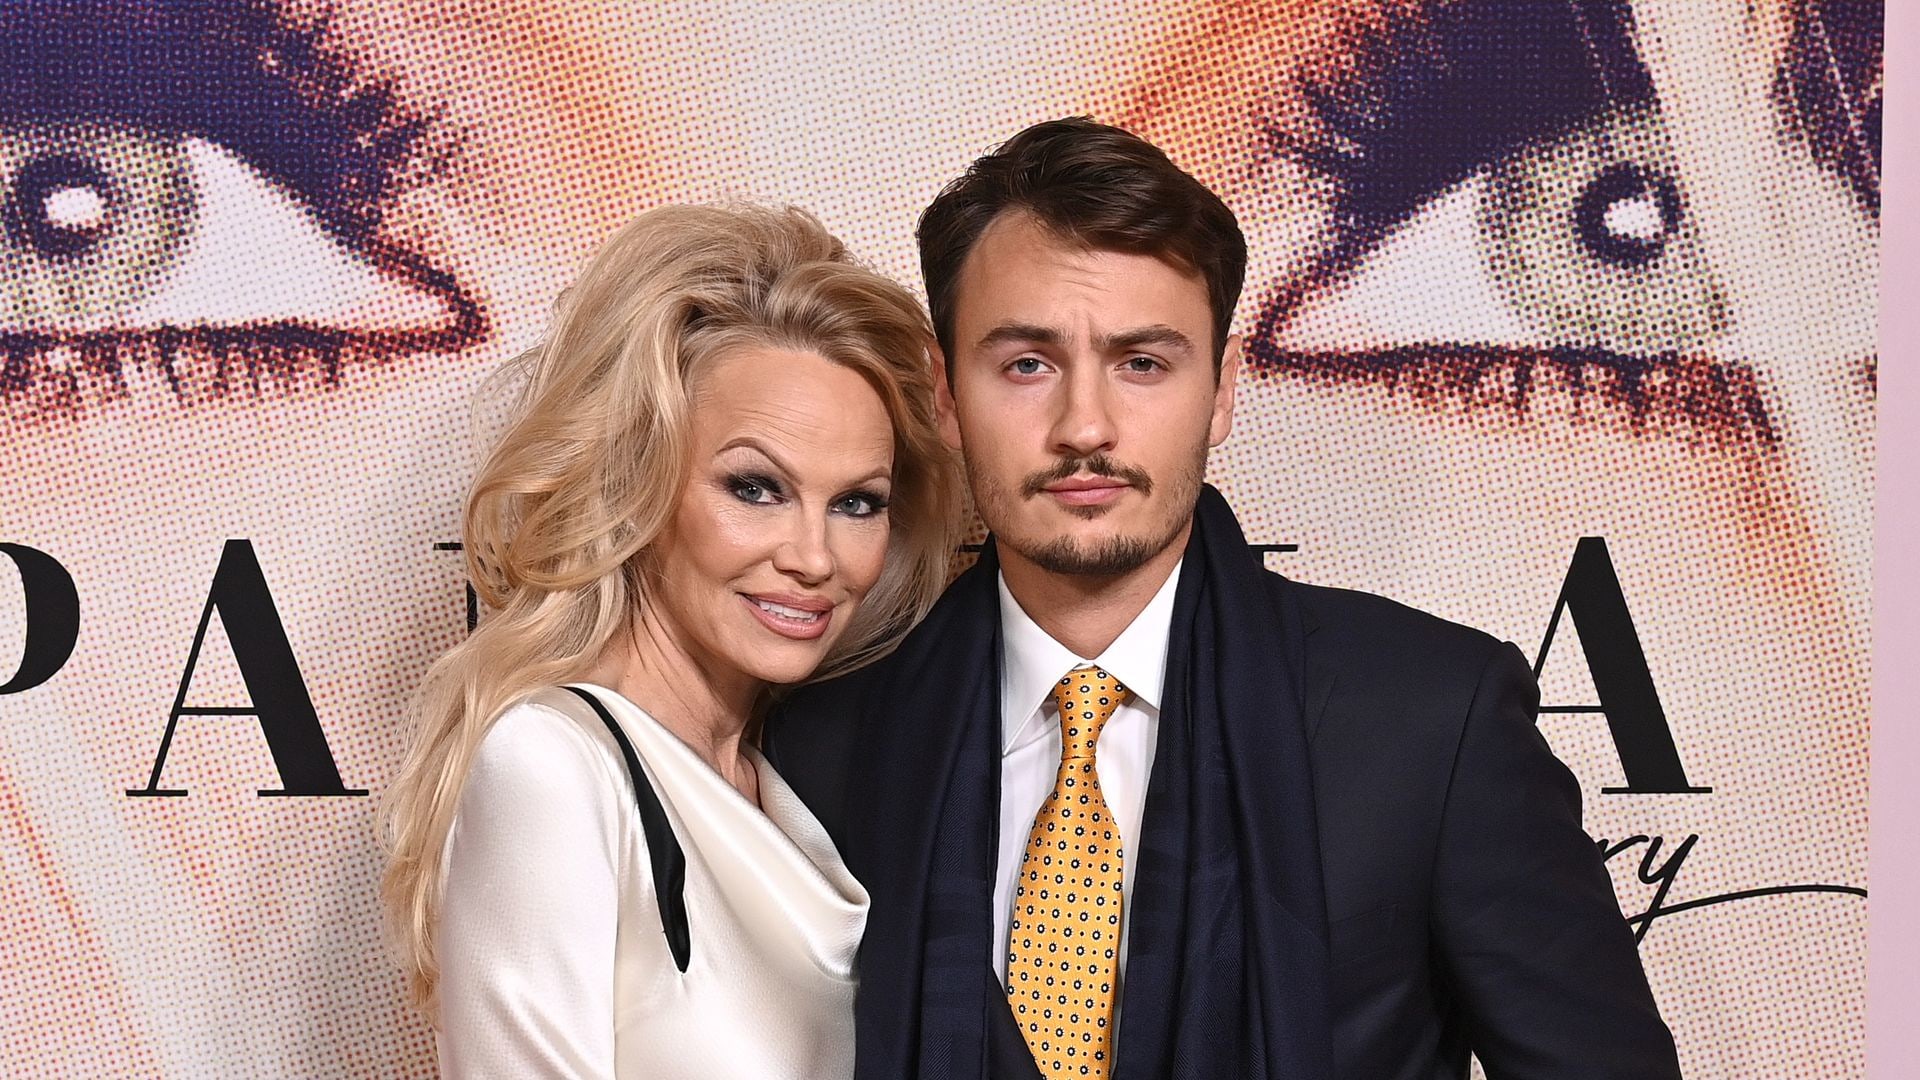 Pamela Anderson and Brandon Thomas Lee attend the "Pamela, a love story" NY Special Screening at The Paris Theatre on February 01, 2023 in New York City